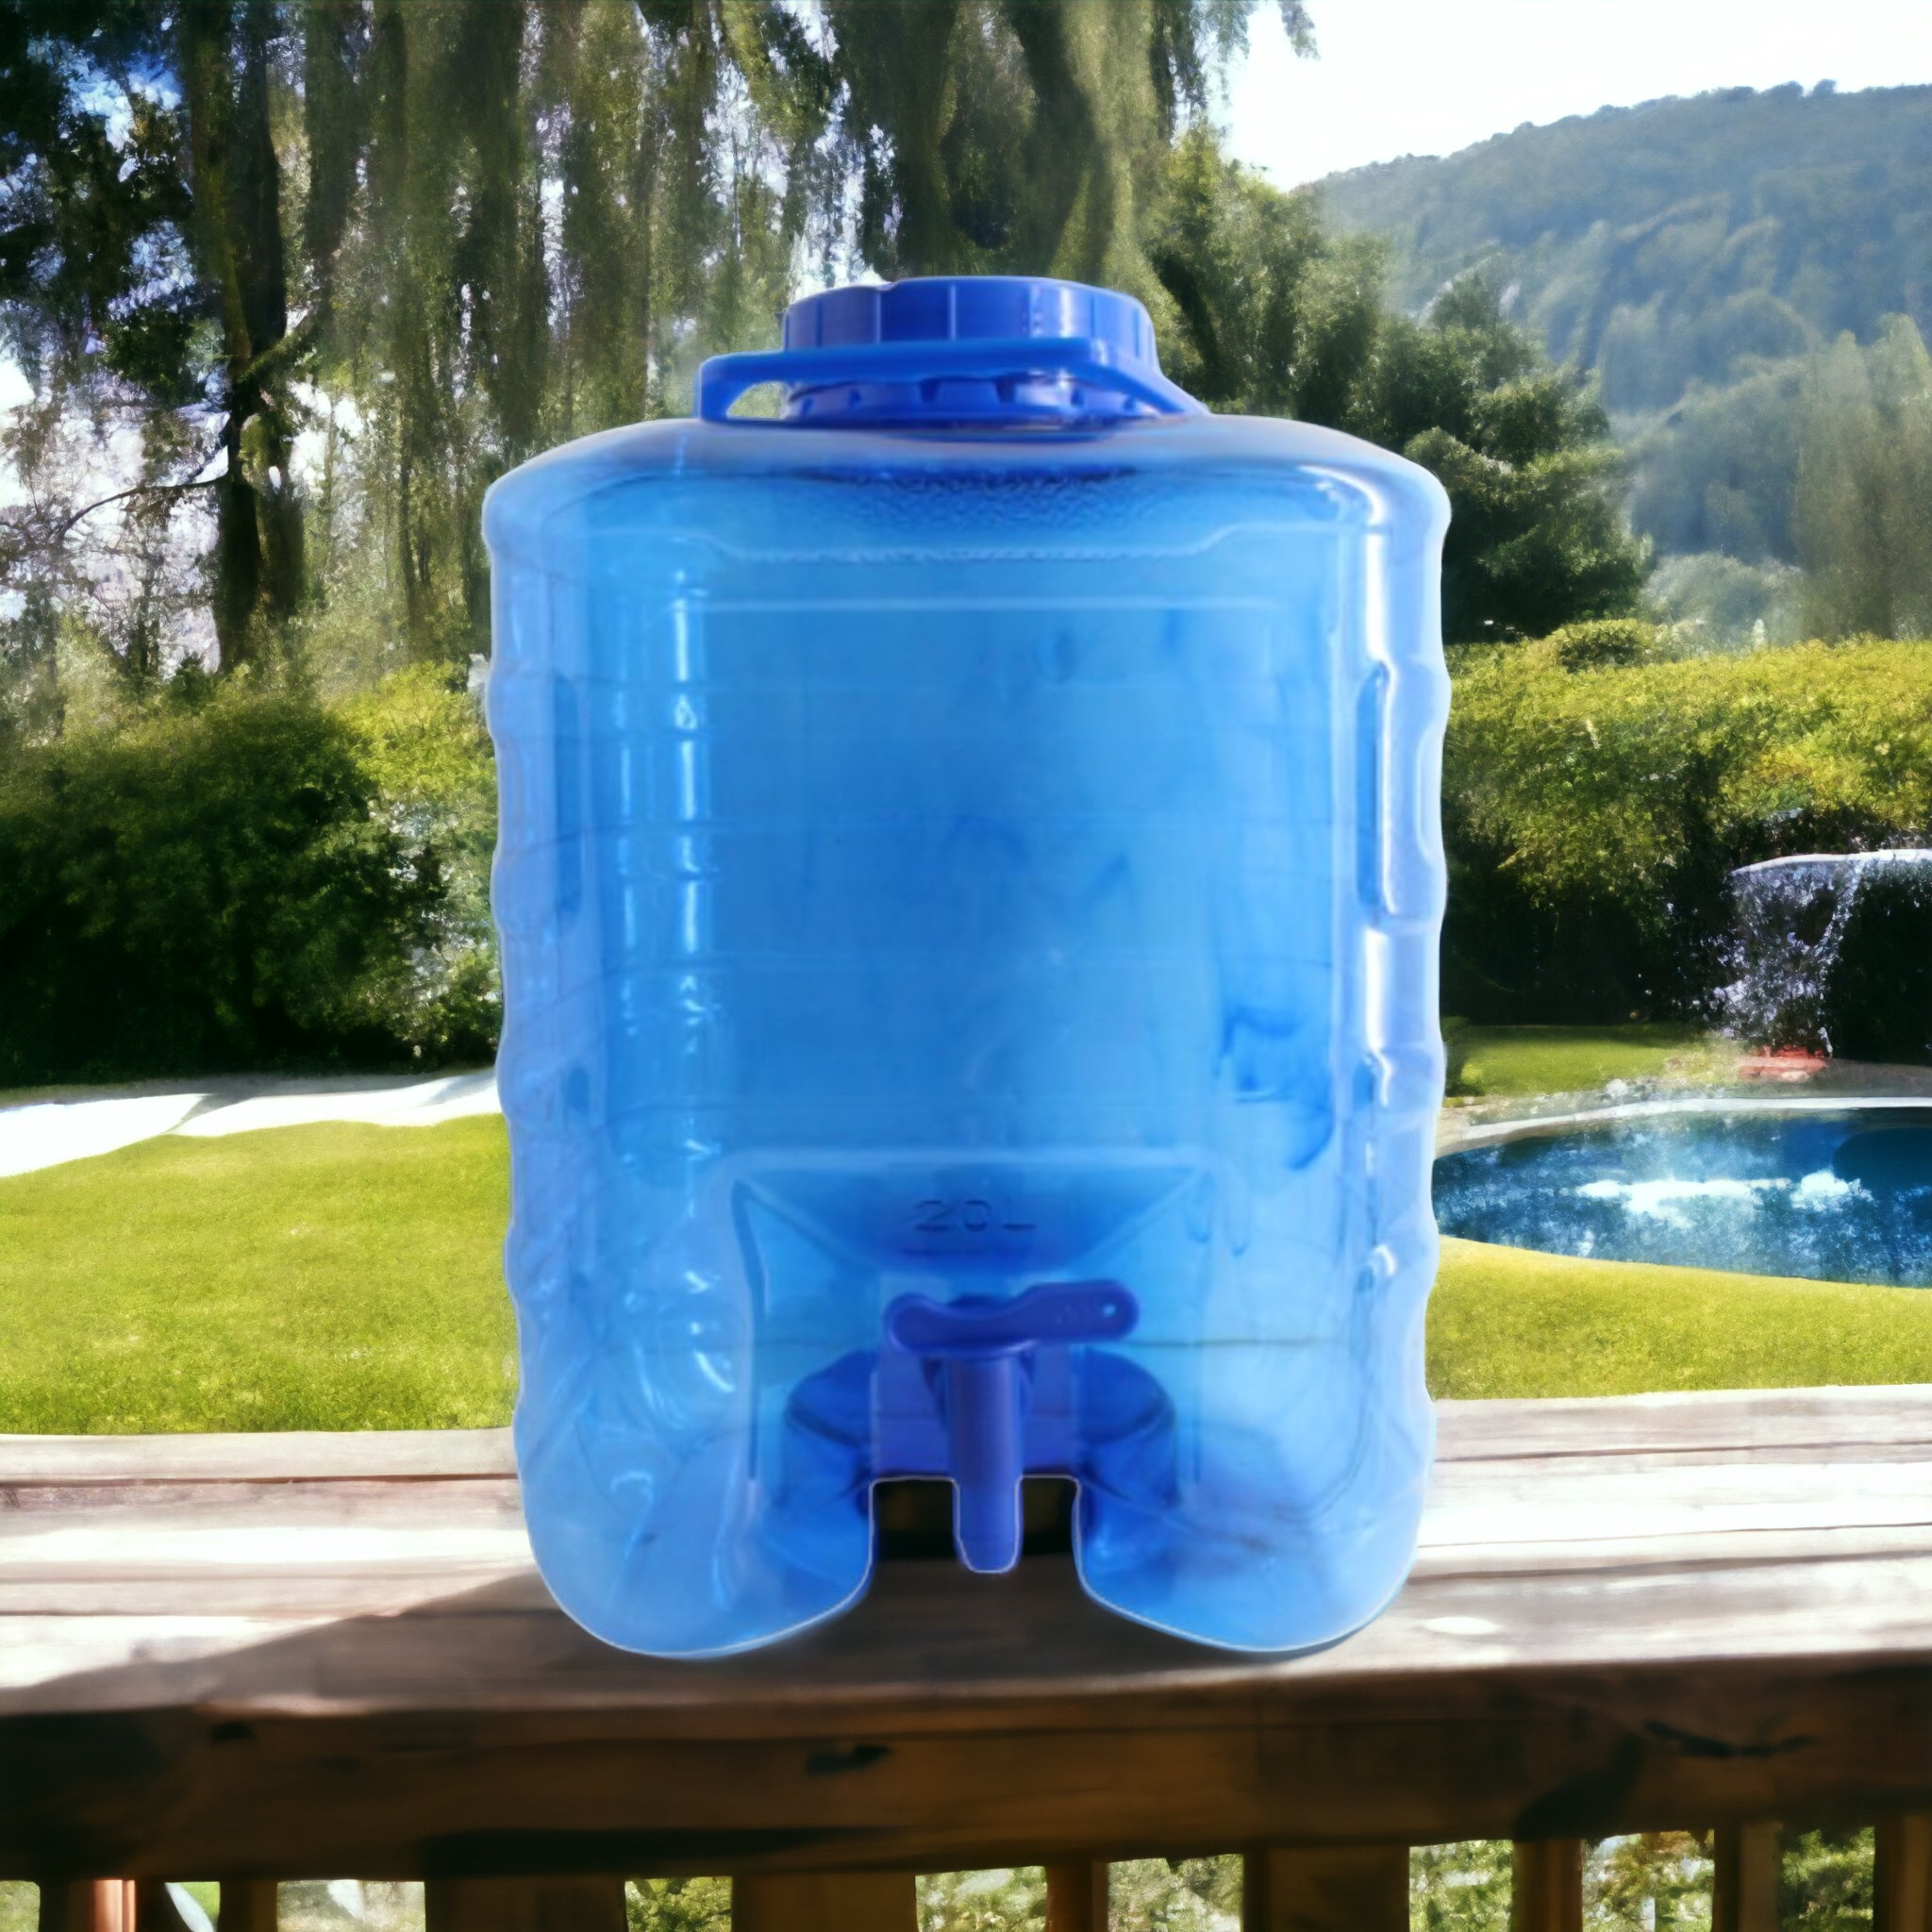 25L Water Dispenser with Tap Square Blue